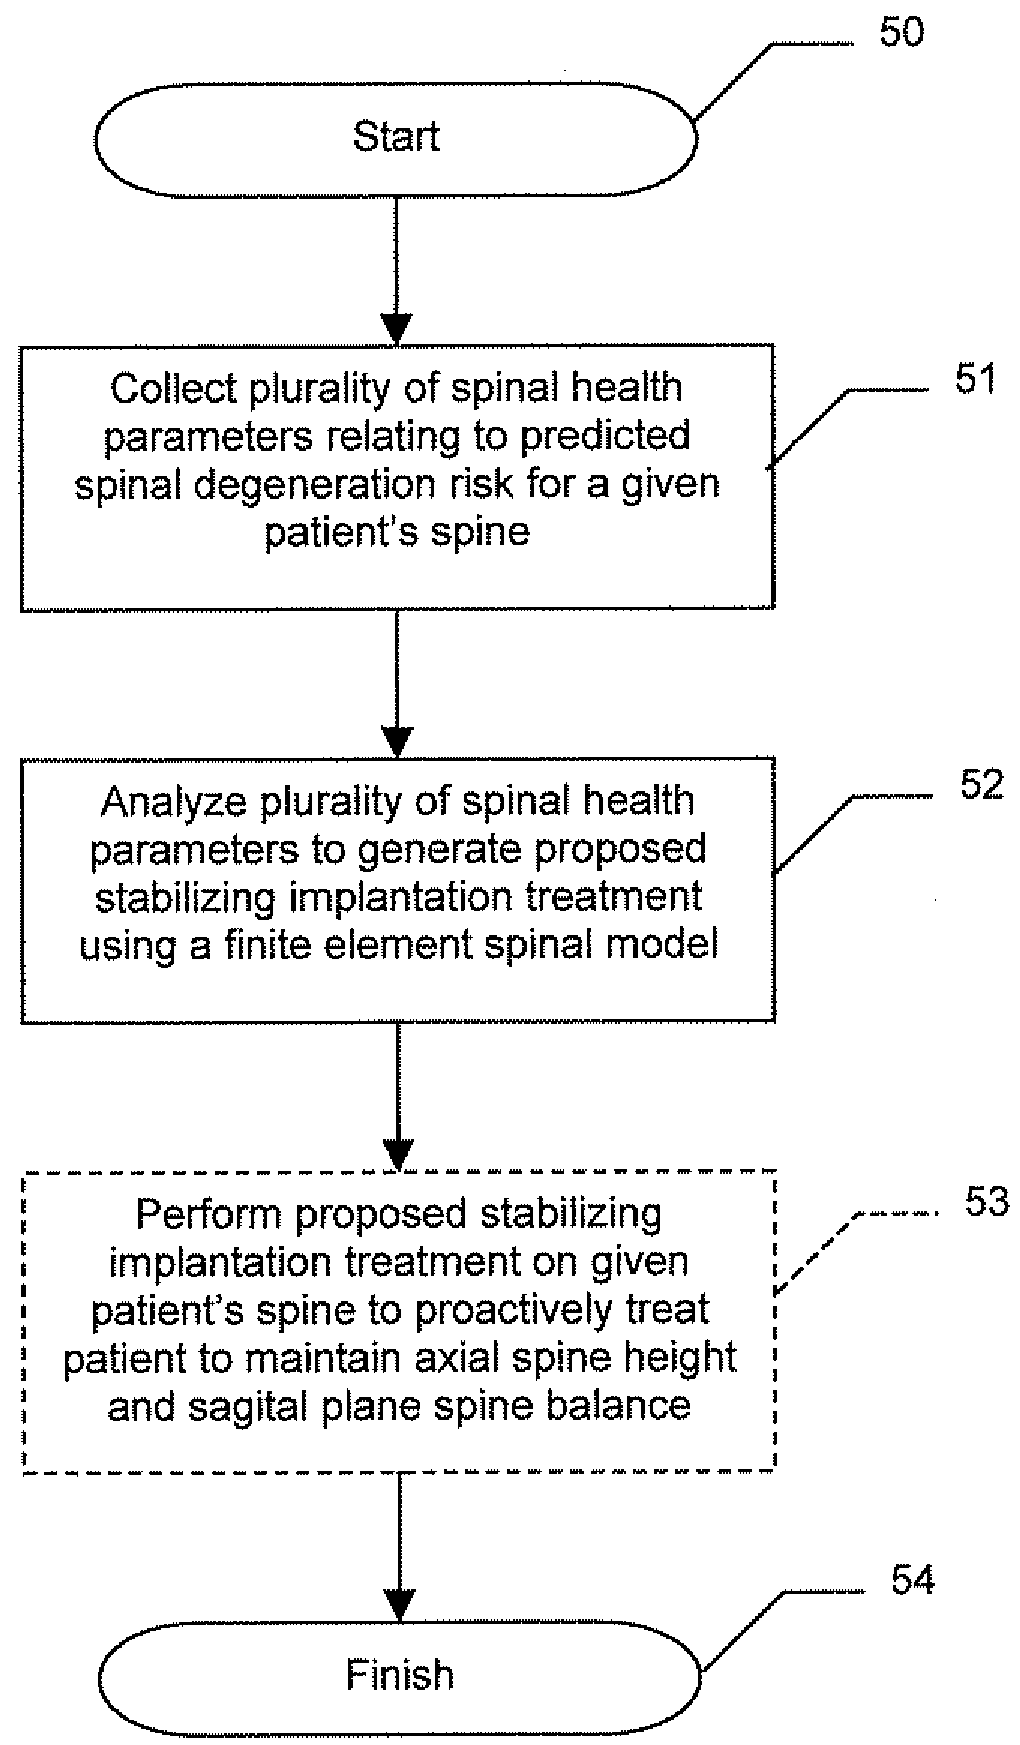 Spinal stabilization treatment methods for maintaining axial spine height and sagital plane spine balance